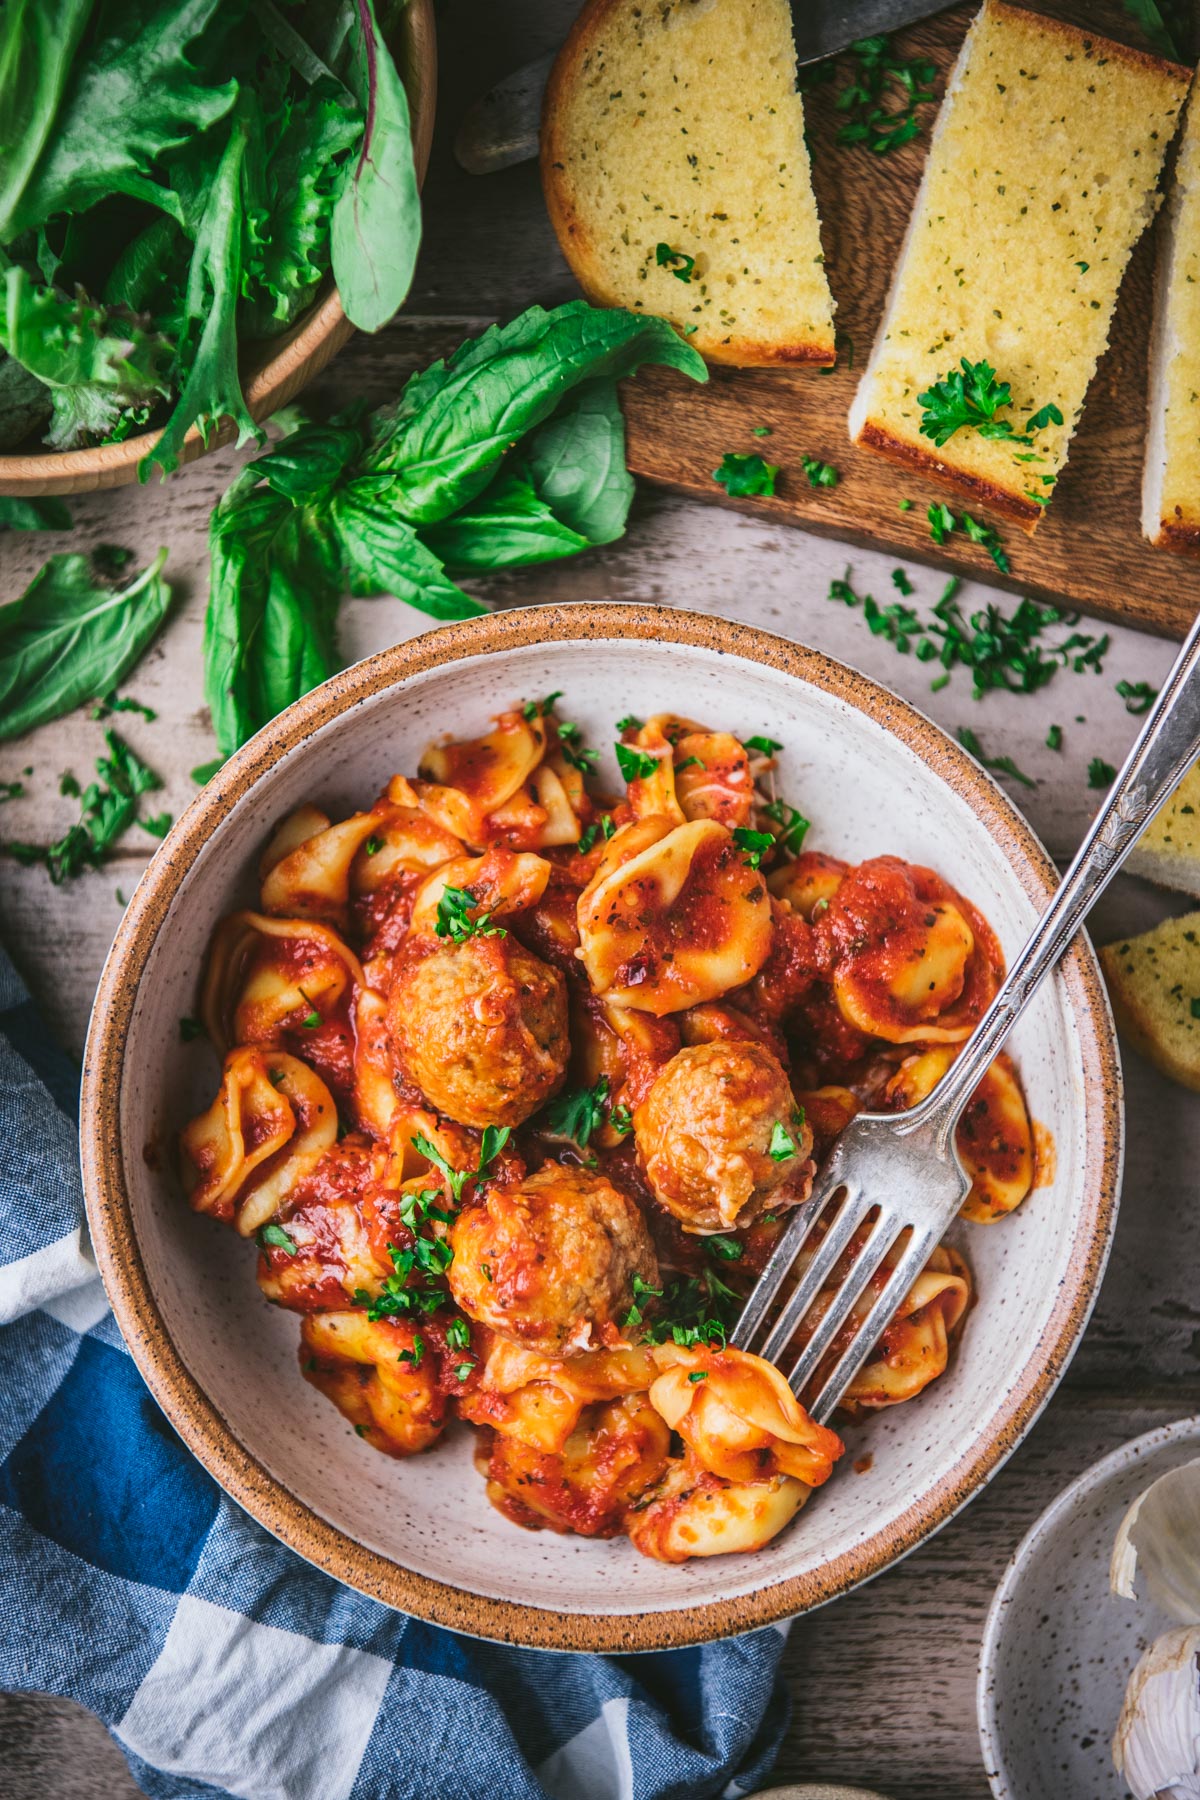 Overhead shot of a bowl of tortellini and meatballs with a side salad and garlic bread.